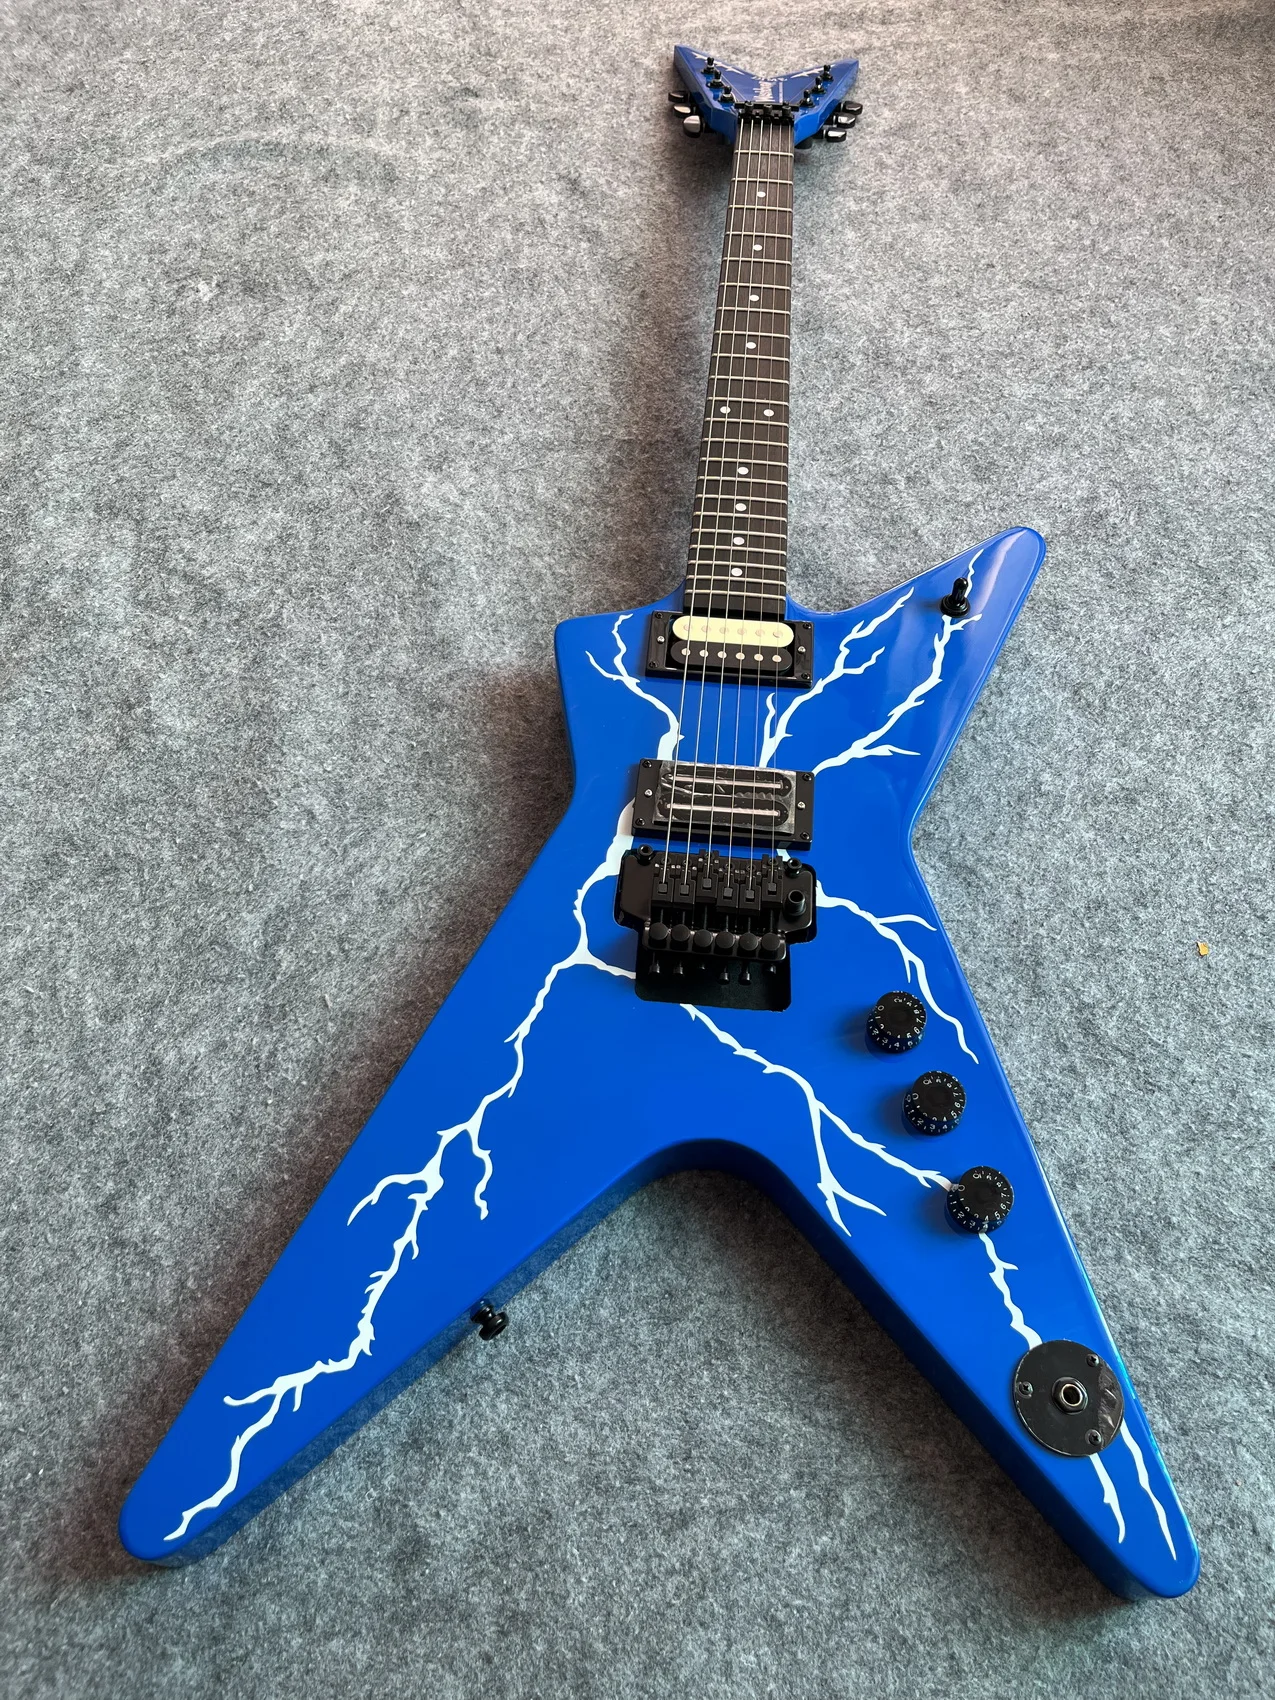 

The piano body is a lightning patterned special-shaped electric guitar the Big Fork Blade Series of Big lightning anomaly Guitar